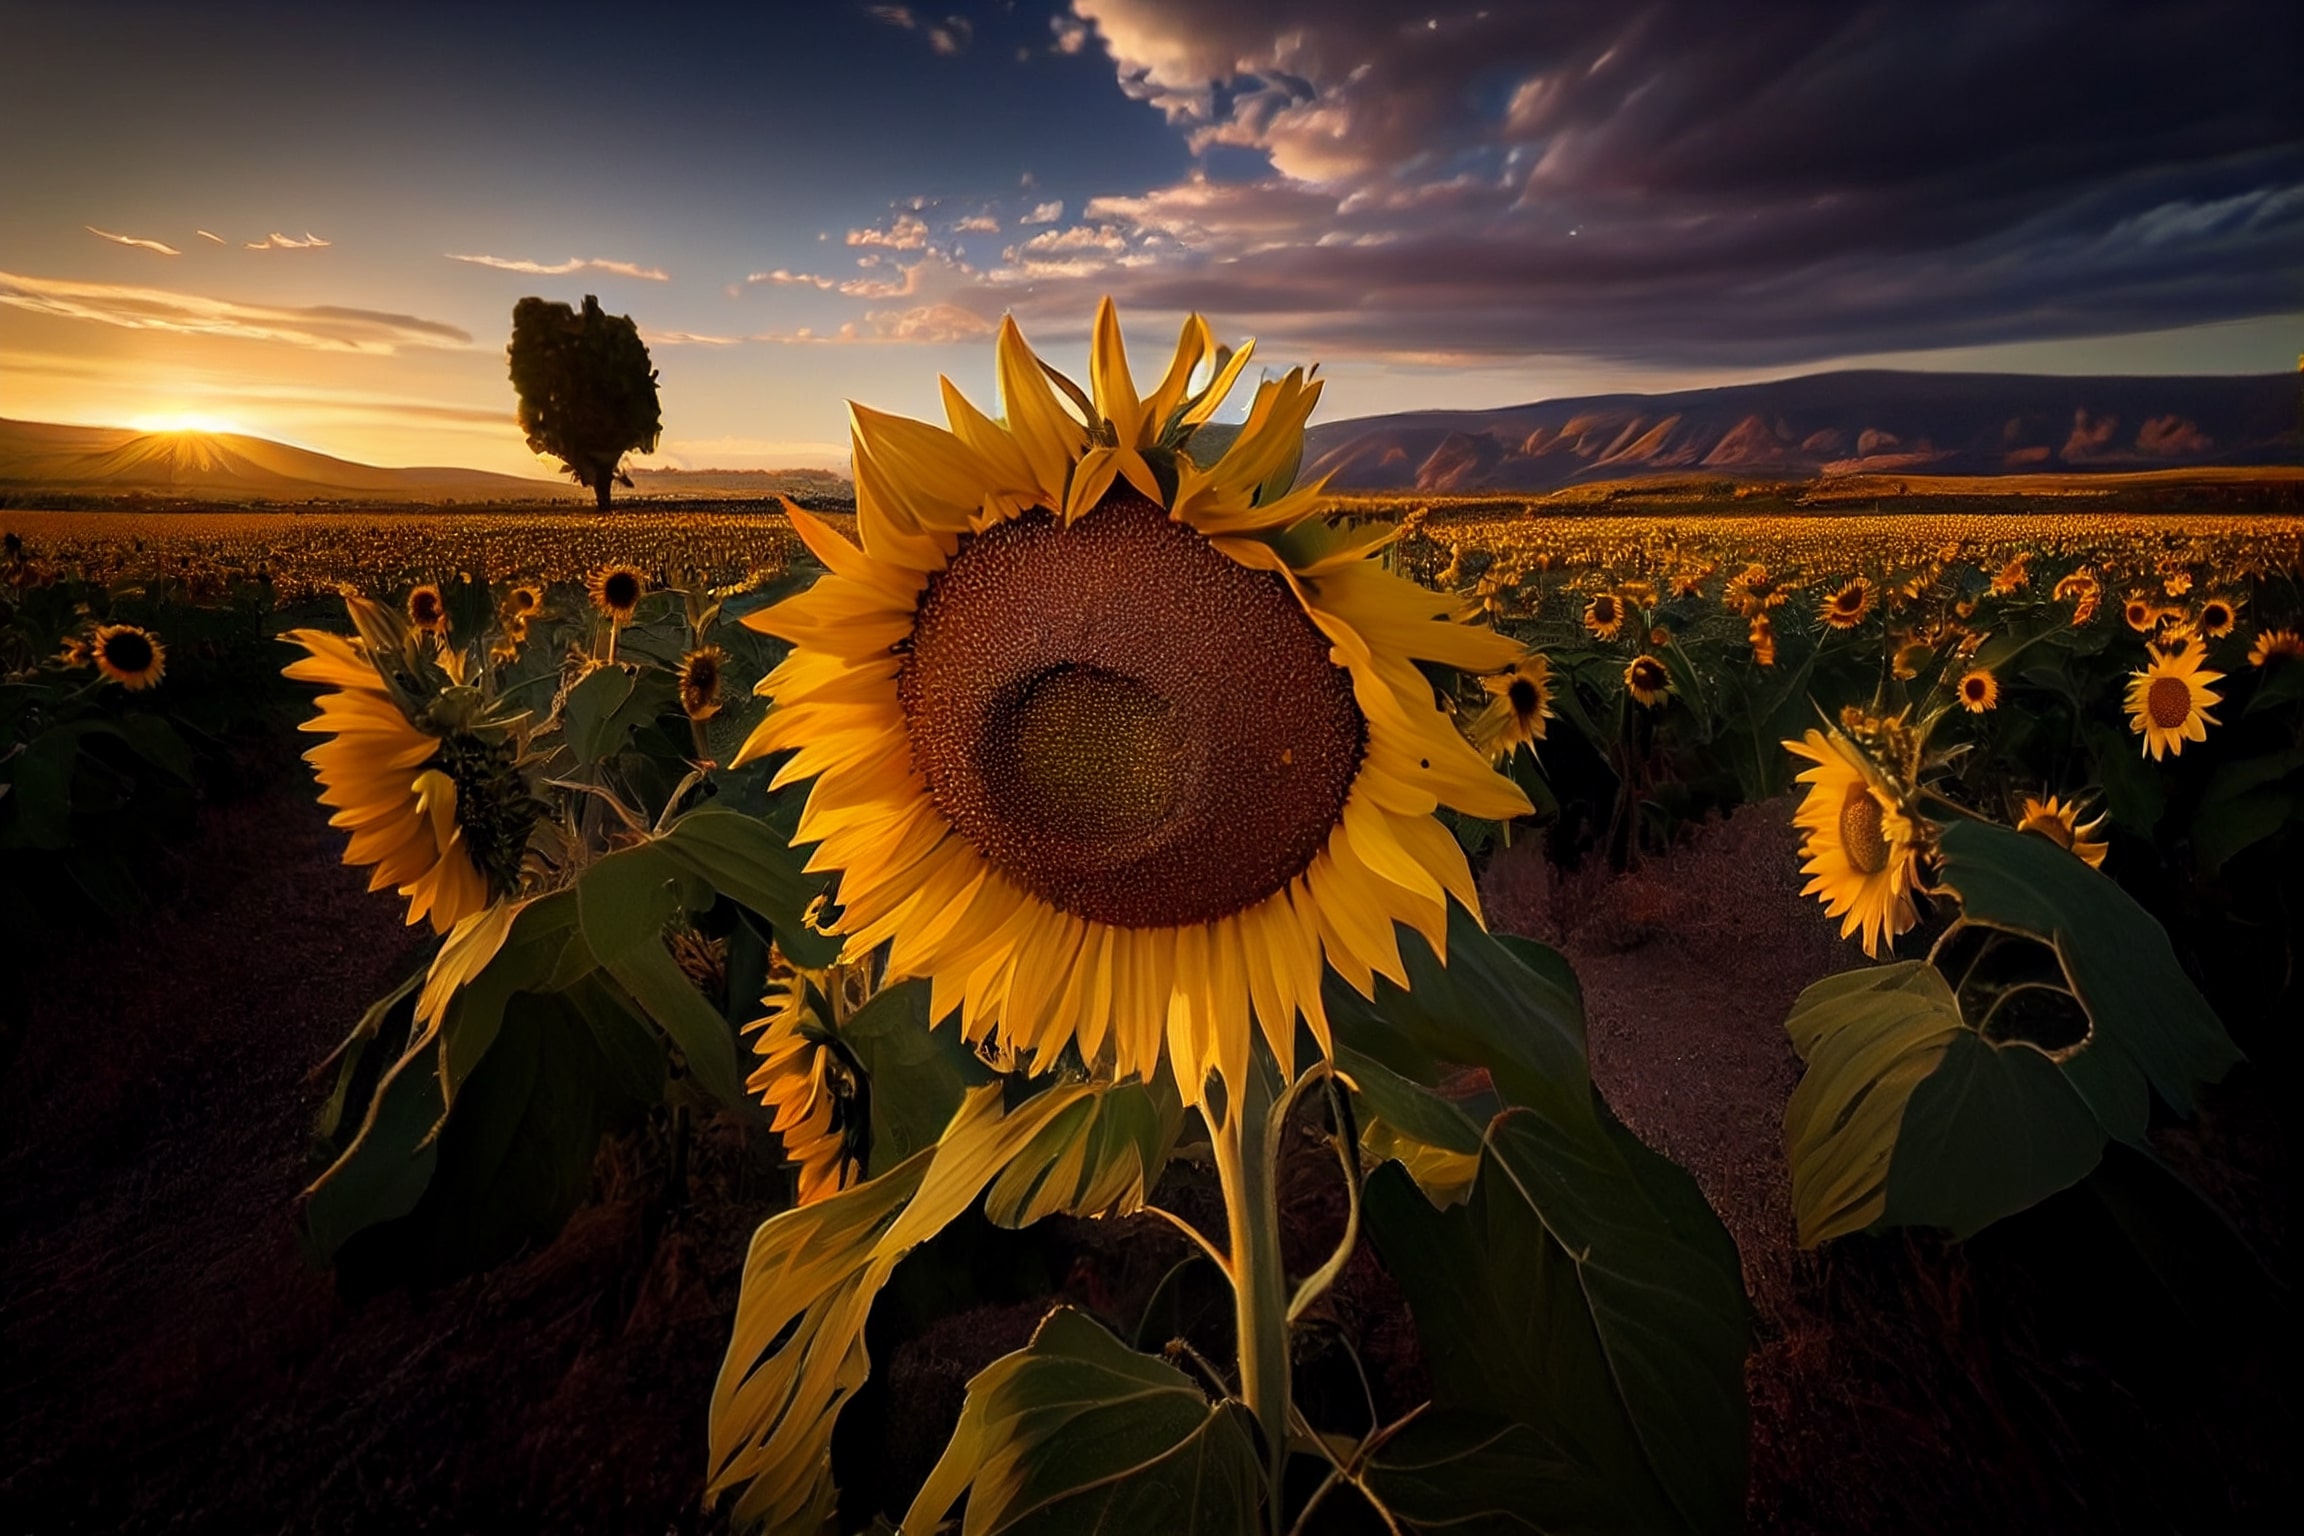 Field of sunflowers with a sunset in the background.